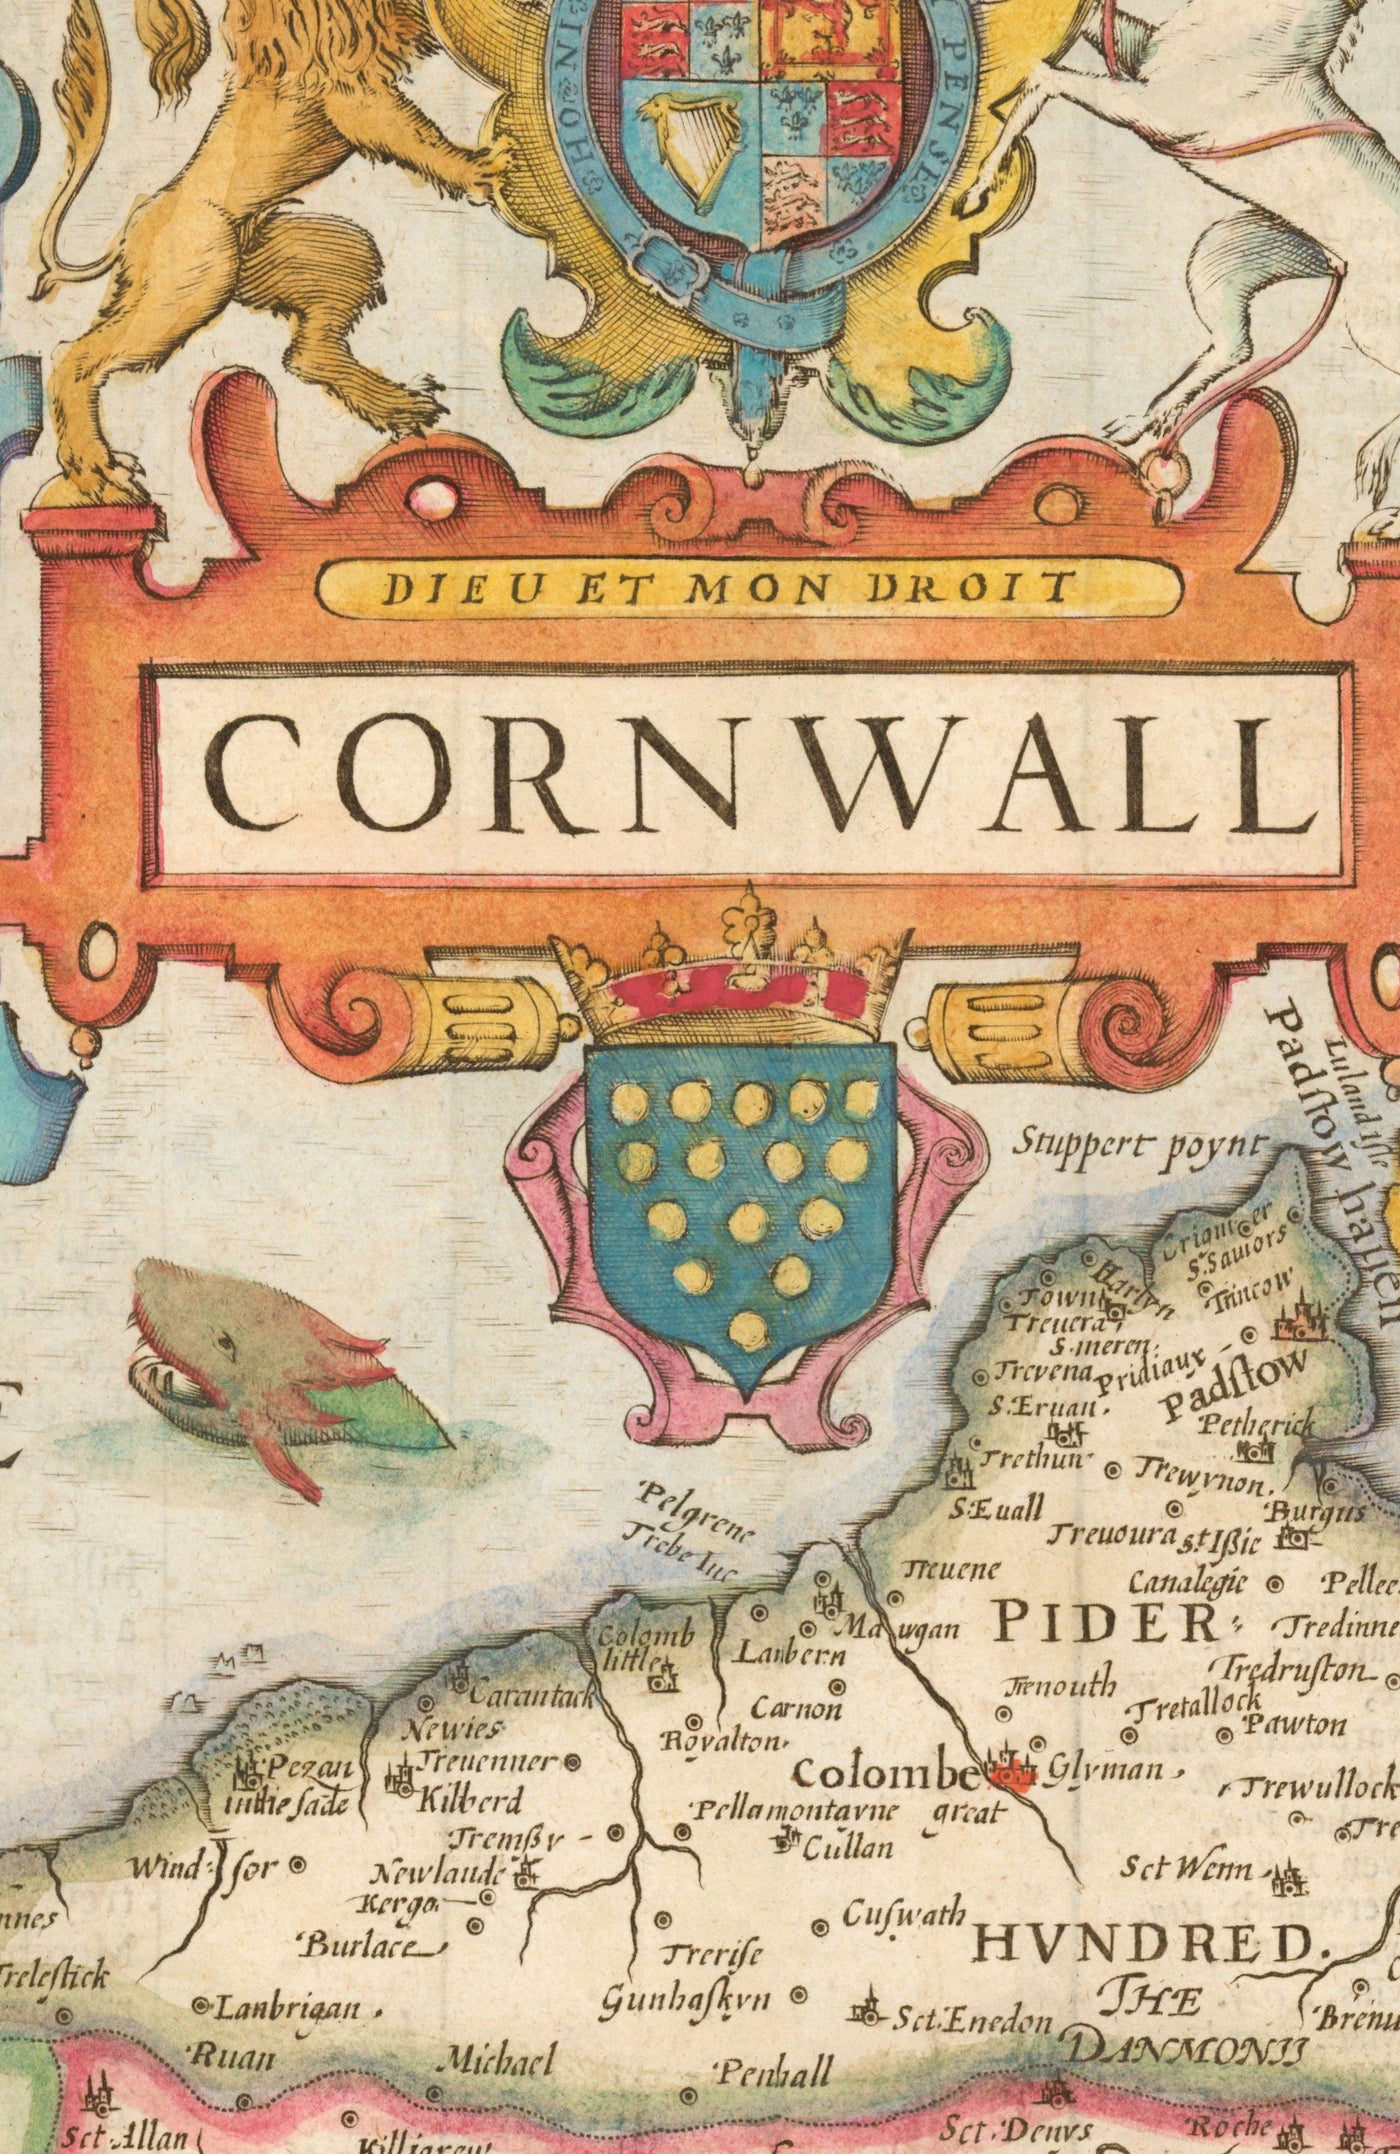 Old Map of Cornwall, 1611 by John Speed - Falmouth, Redruth, St Austell, Truro, Penzance